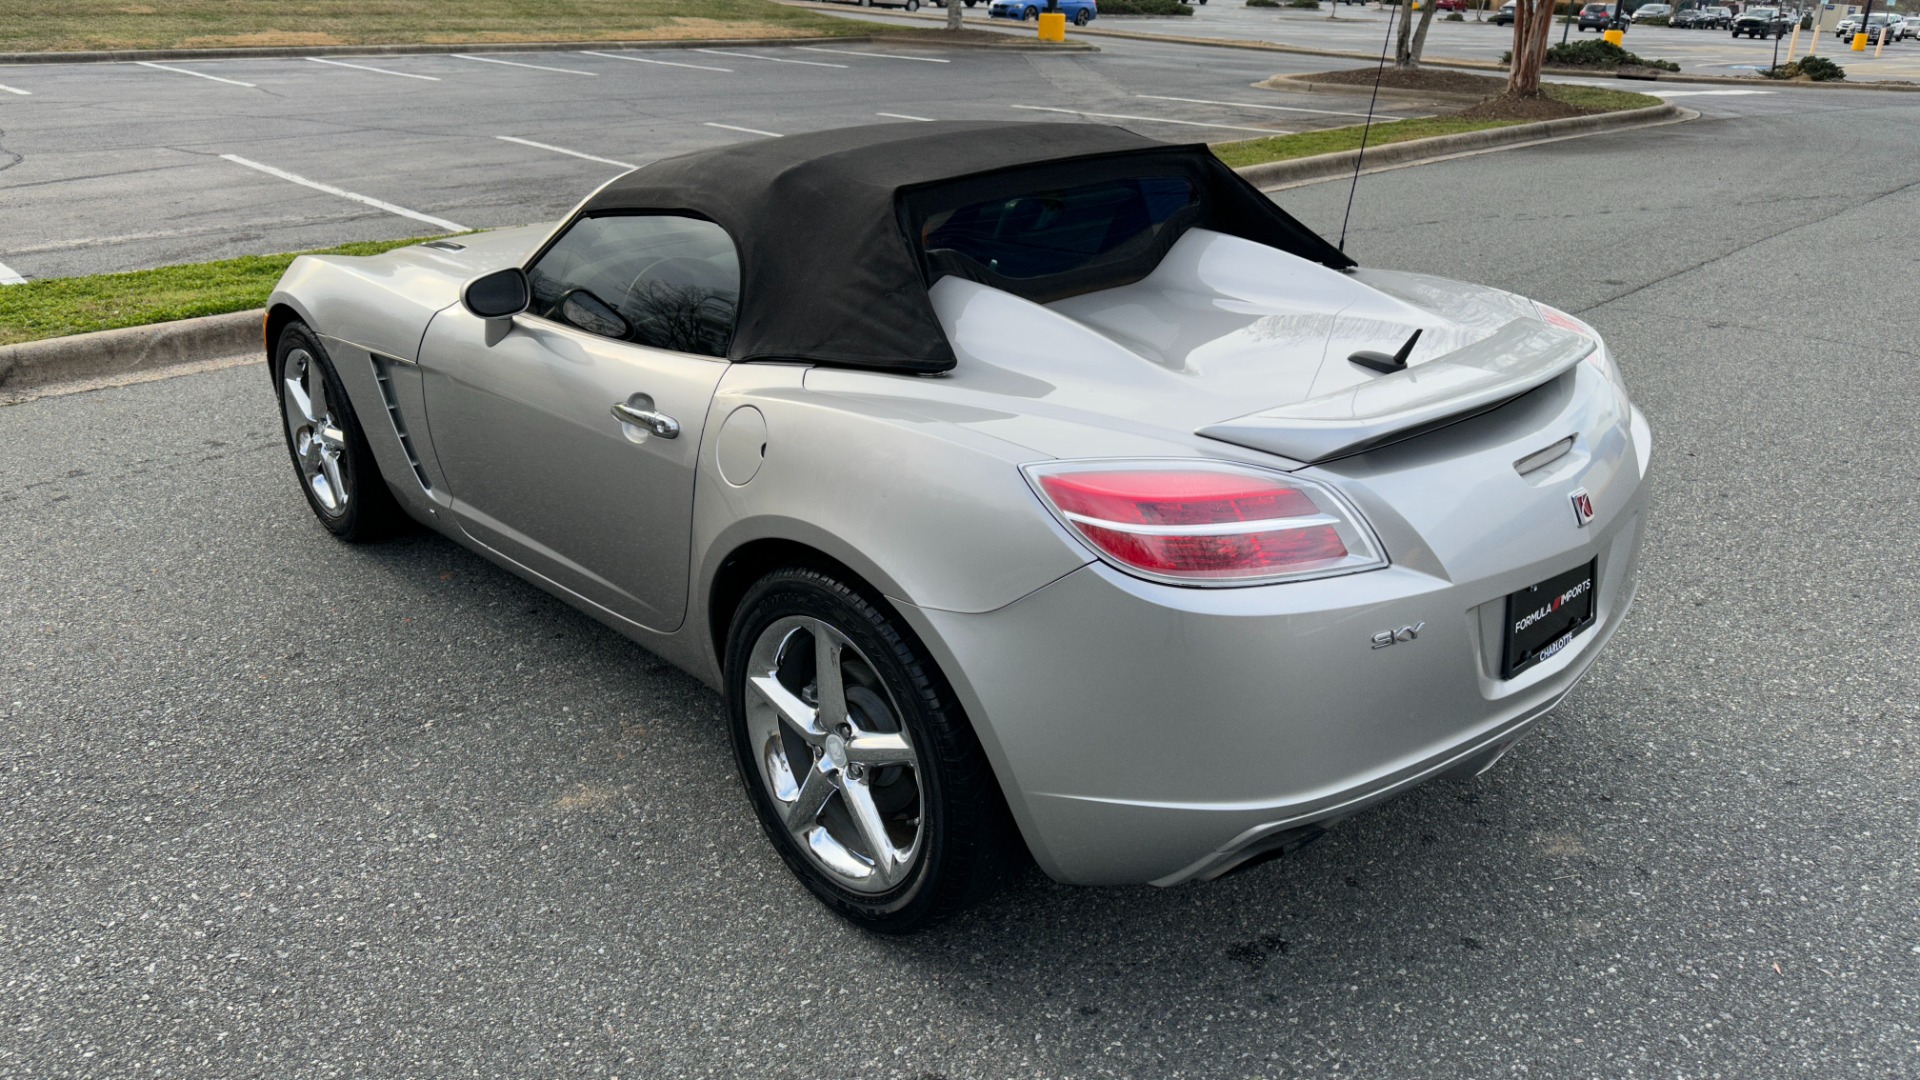 Used 2008 Saturn Sky CONVERTIBLE / MONSOON AUDIO / AUTOMATIC / PREMIUM TRIM / SPOILER for sale $10,995 at Formula Imports in Charlotte NC 28227 9